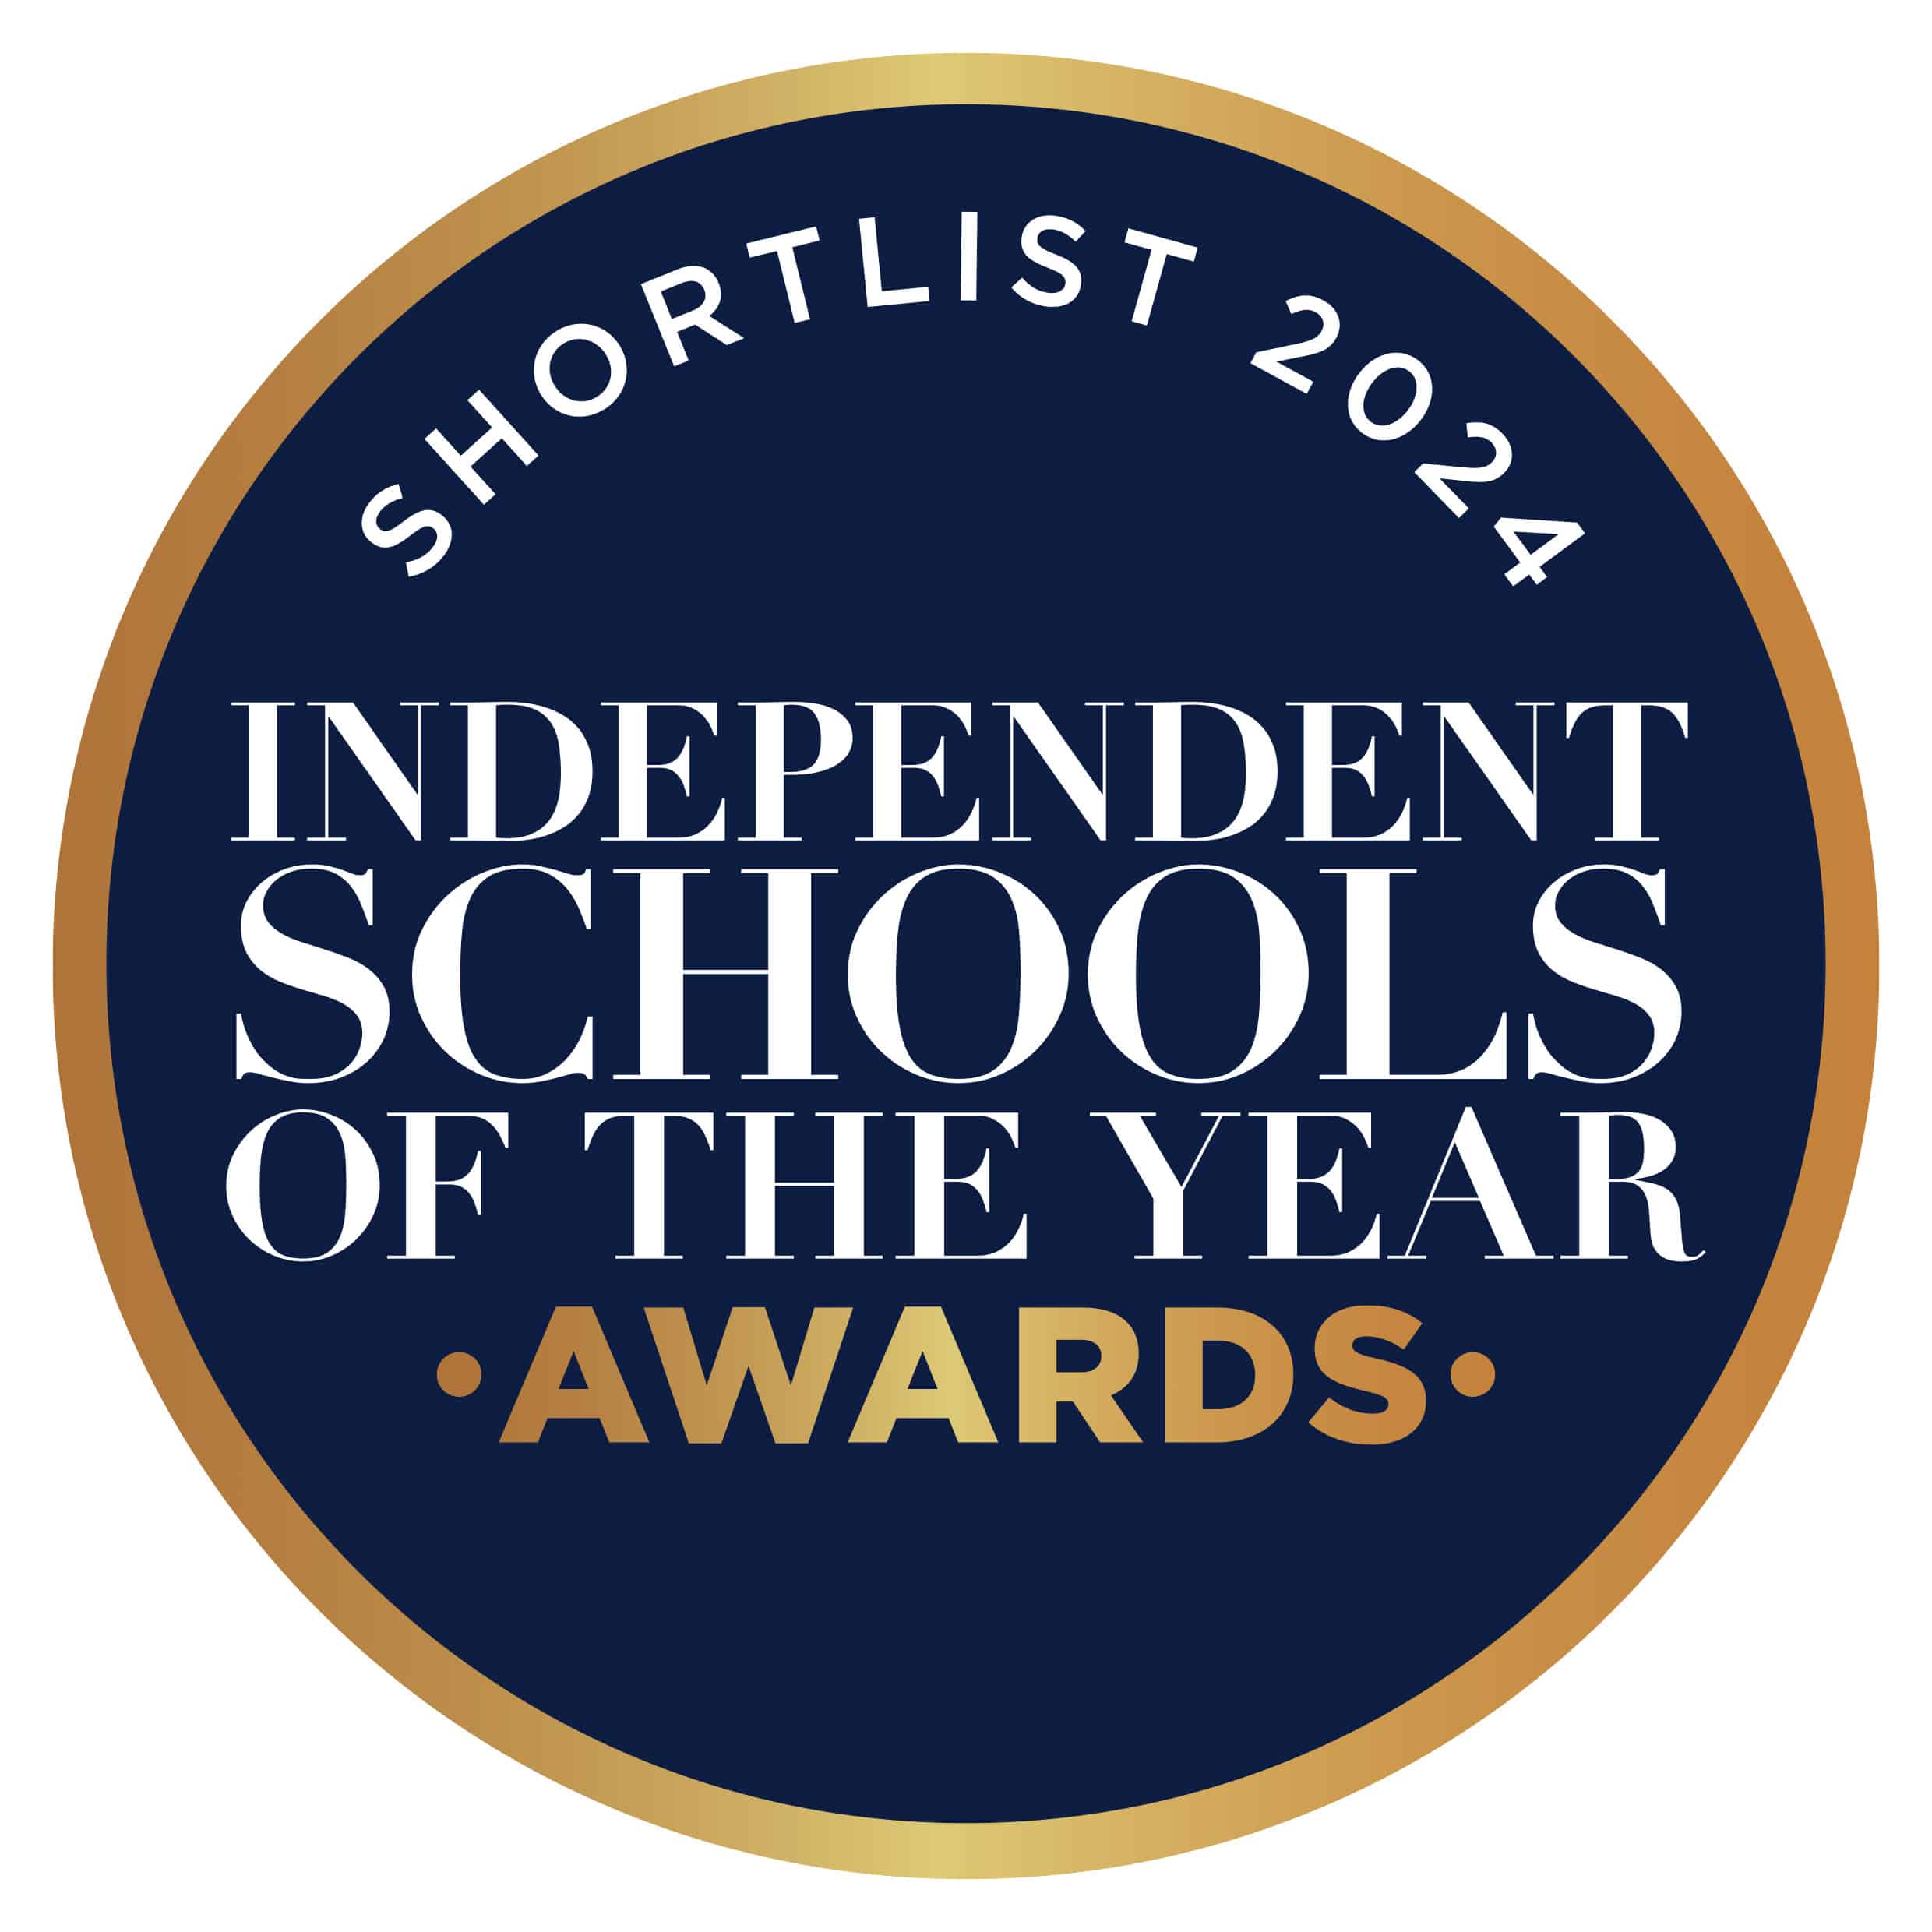 Shortlisted for Independent Schools of the Year Award in Performing Arts